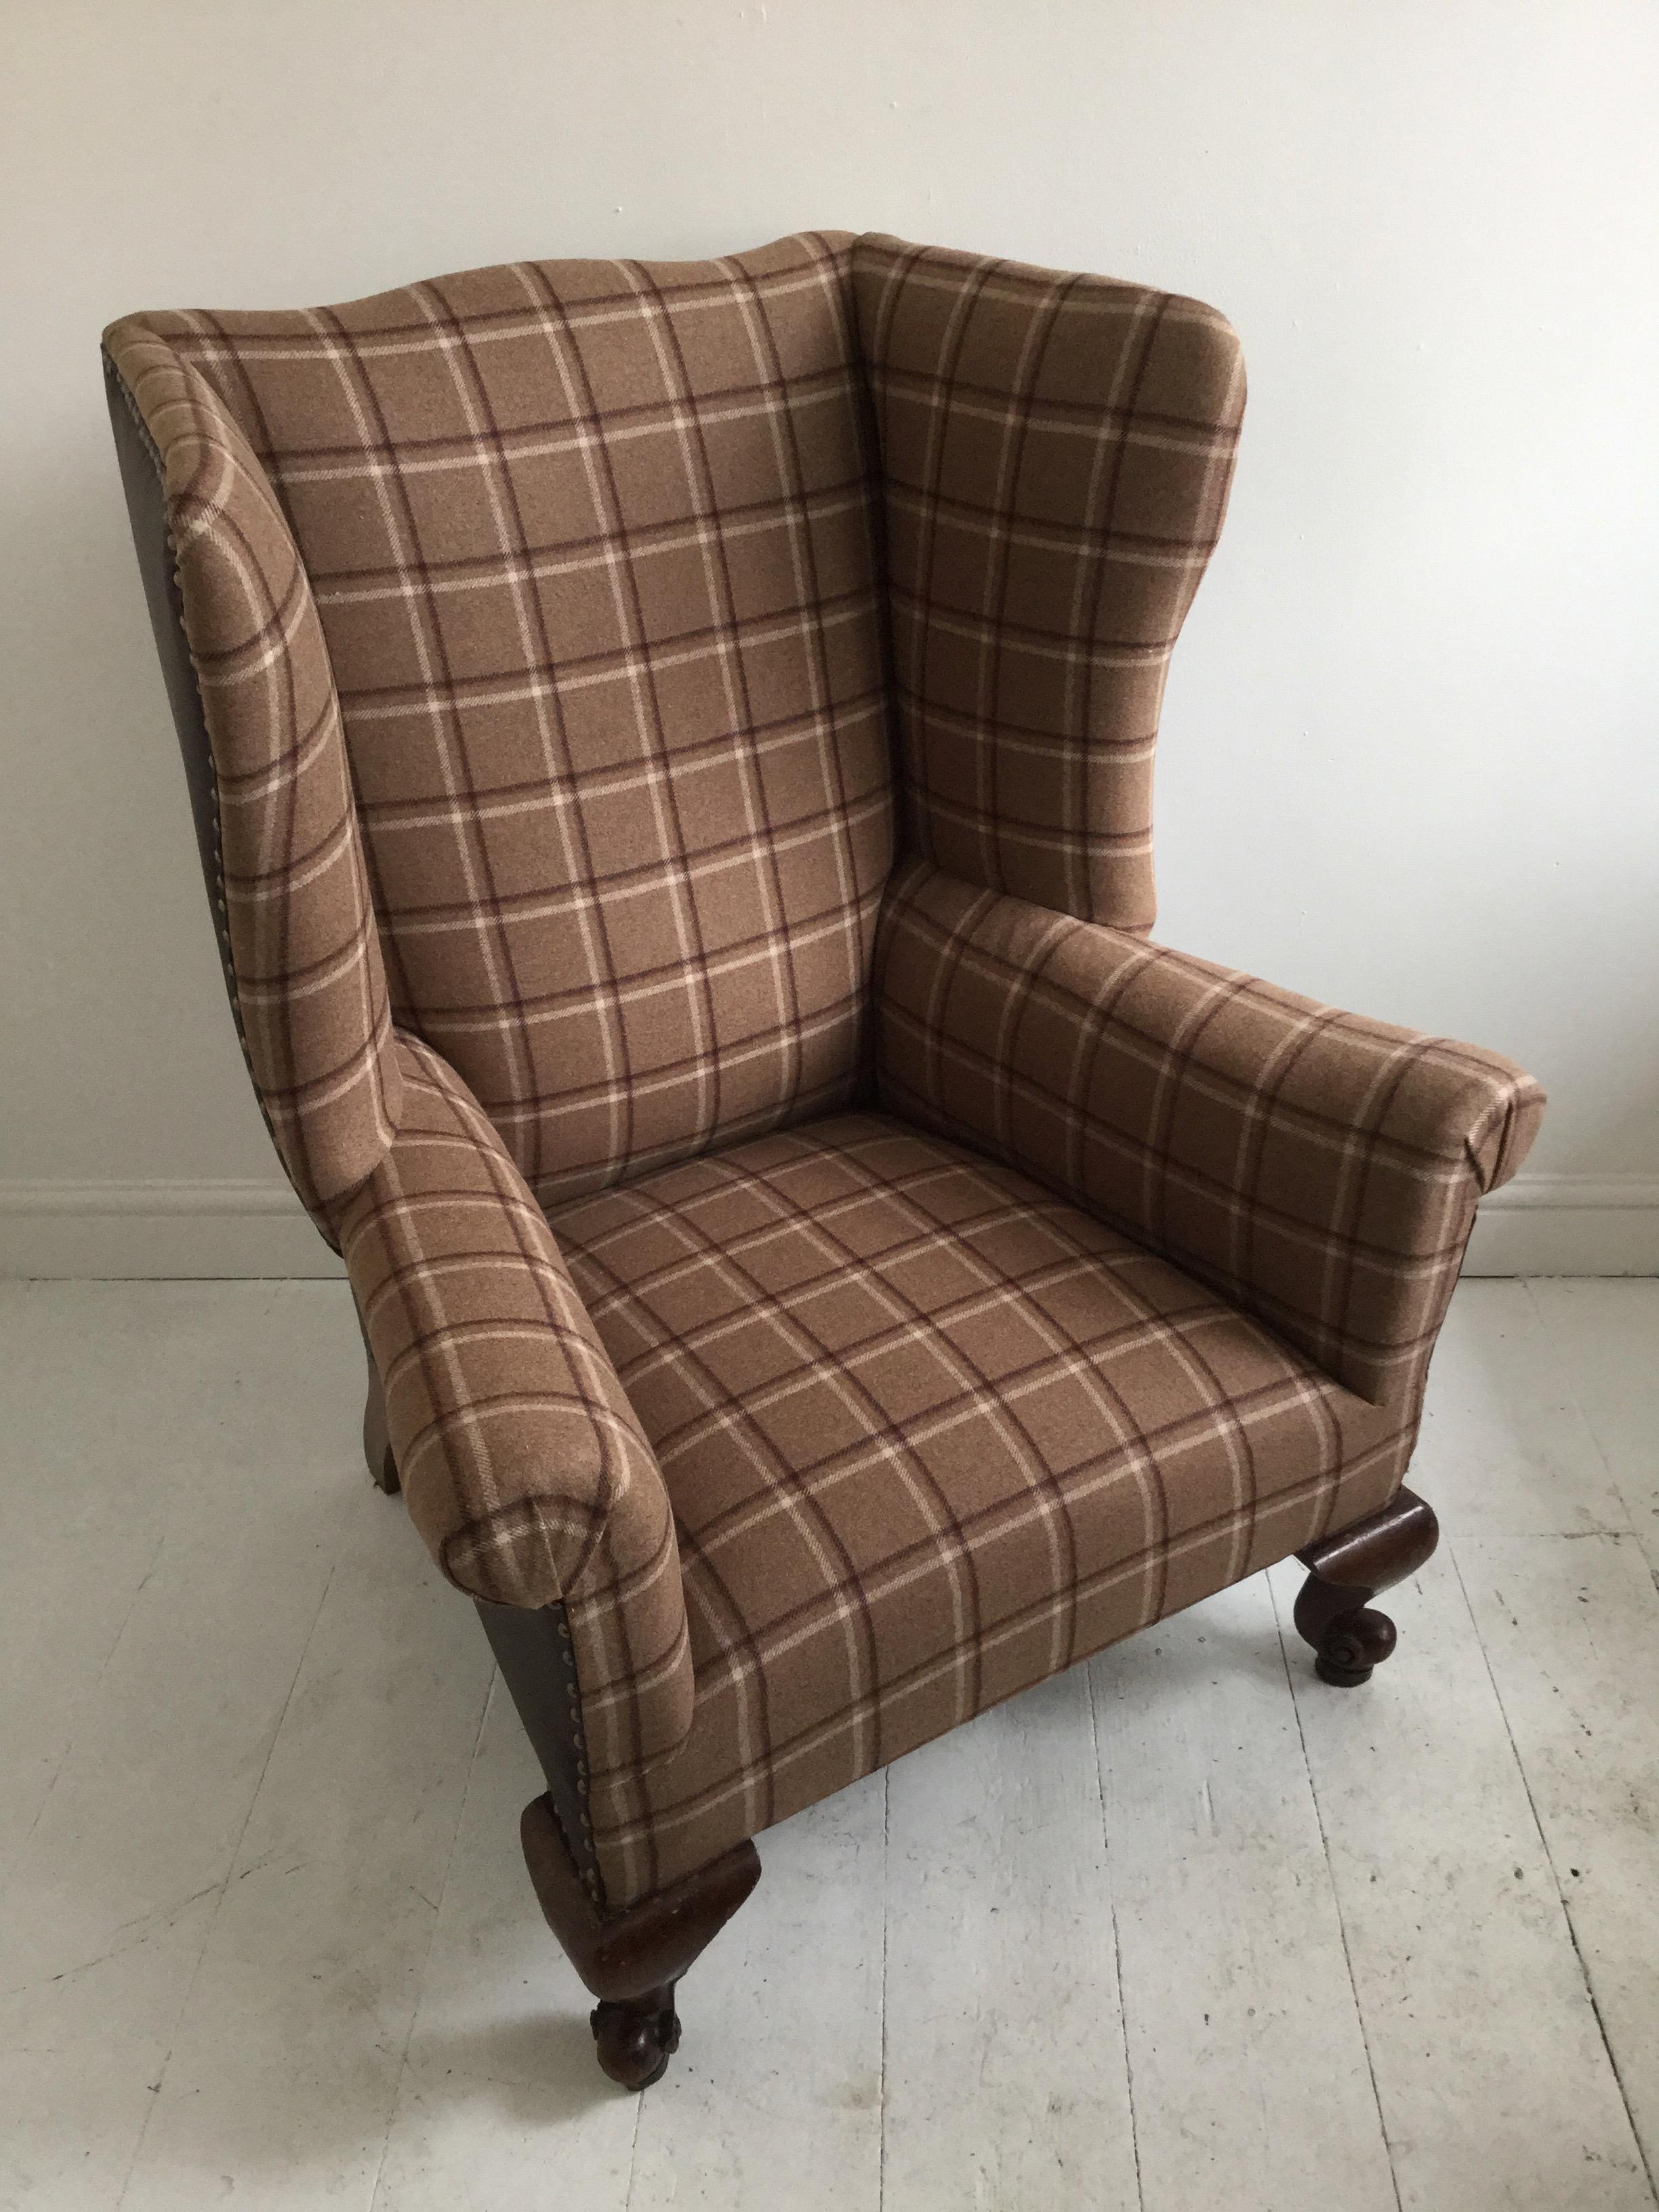 A great English Edwardian wingback or library armchair of generous proportion. It has been sympathetically upholstered in cognac leather and a plaid Scottish wool mix fabric. It has a Country gentleman's club house feel.
This chair has a firm seat,